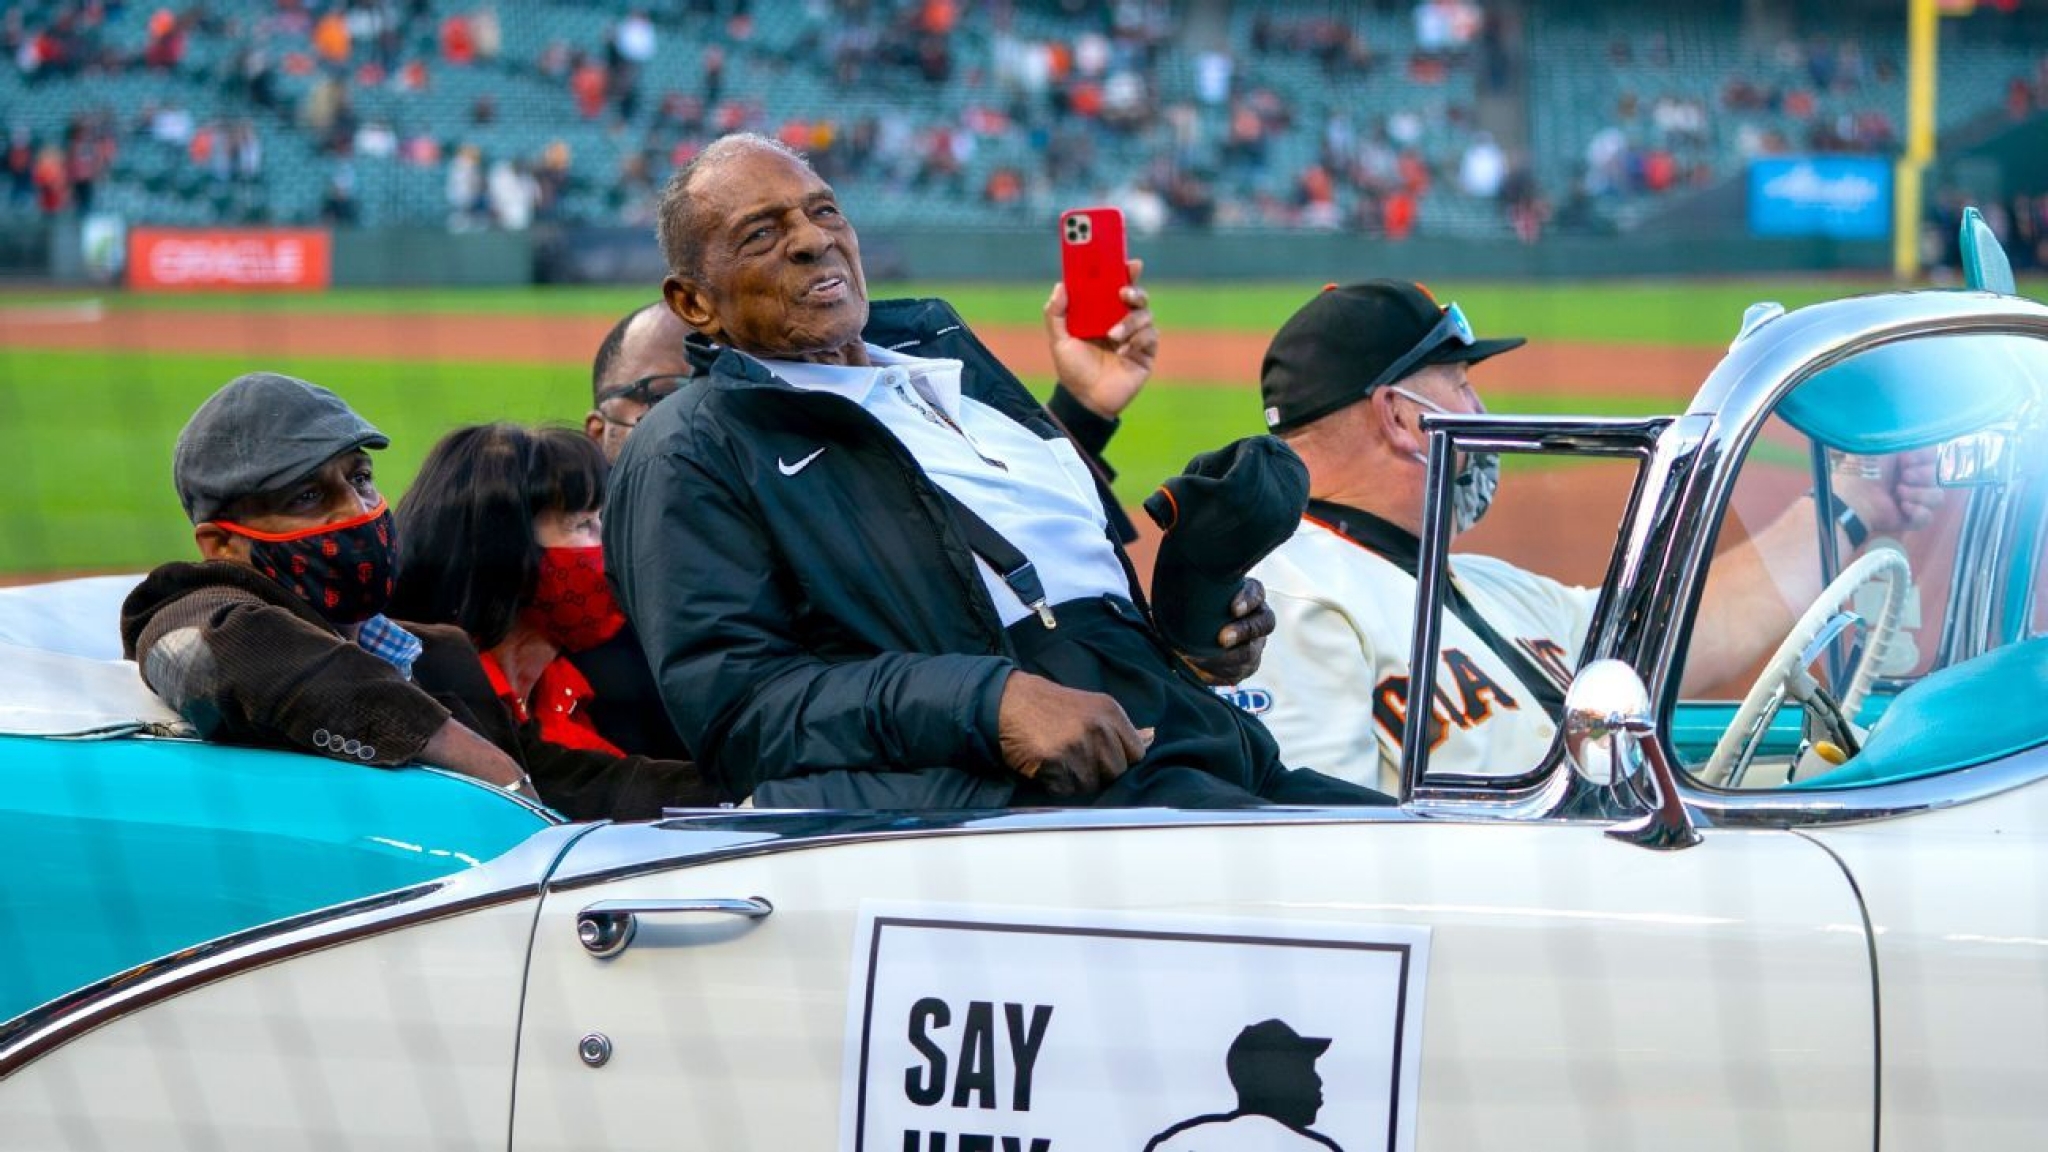 Mays arrives in style as Giants celebrate his 90th